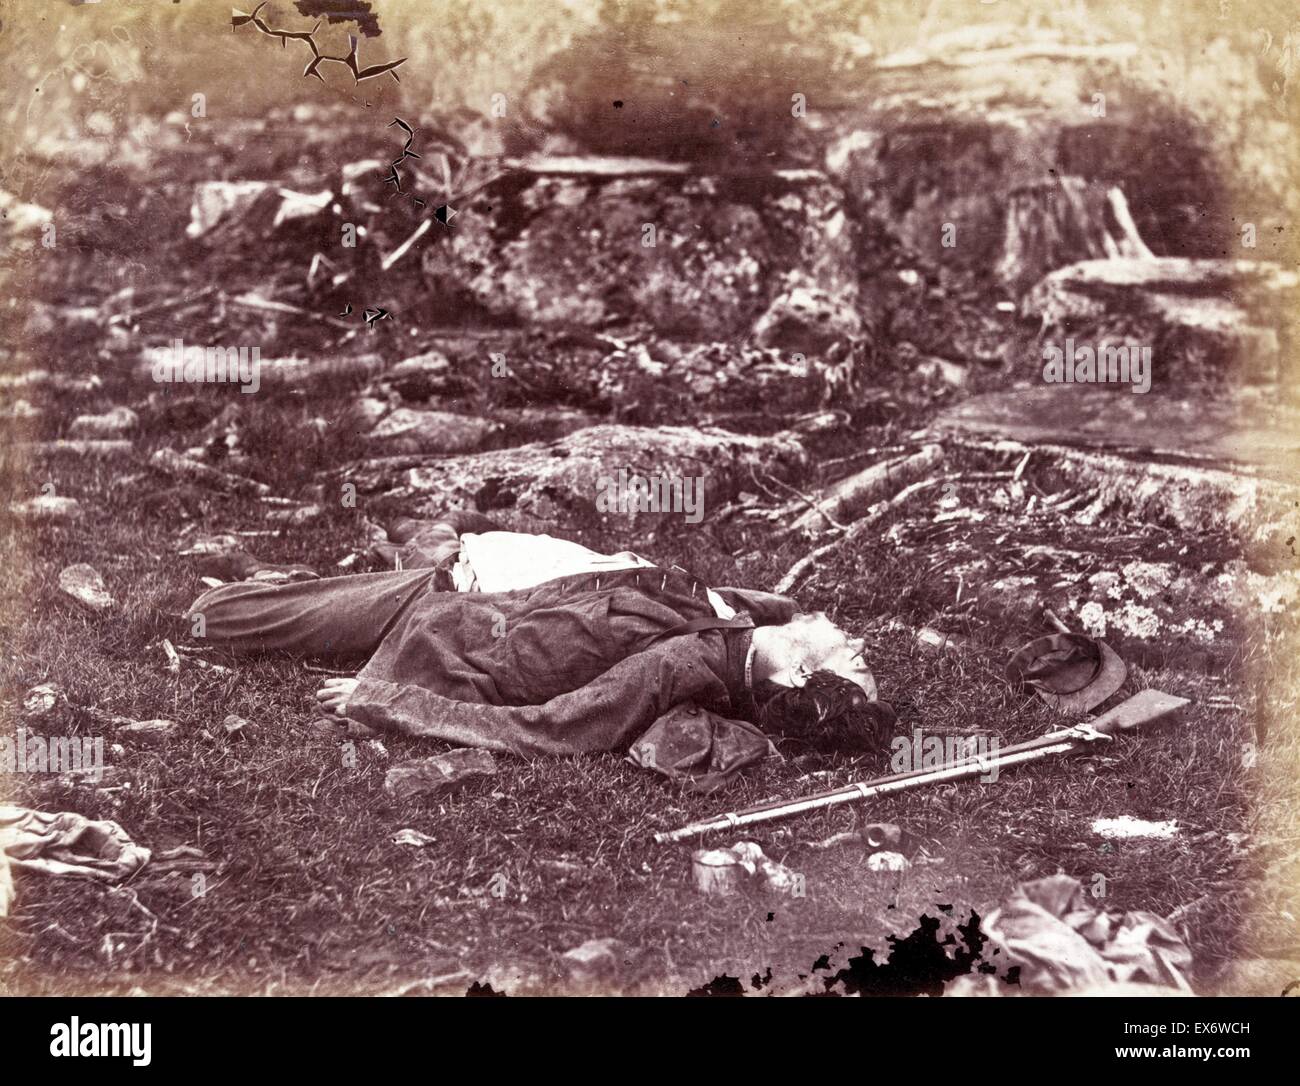 Photomechanical print of a deceased sharpshooter during the Battle of Gettysburg. The Battle of Gettysburg lasted from July 1–3, 1863, in and around the town of Gettysburg, Pennsylvania, by Union and Confederate forces during the American Civil War. Photo Stock Photo